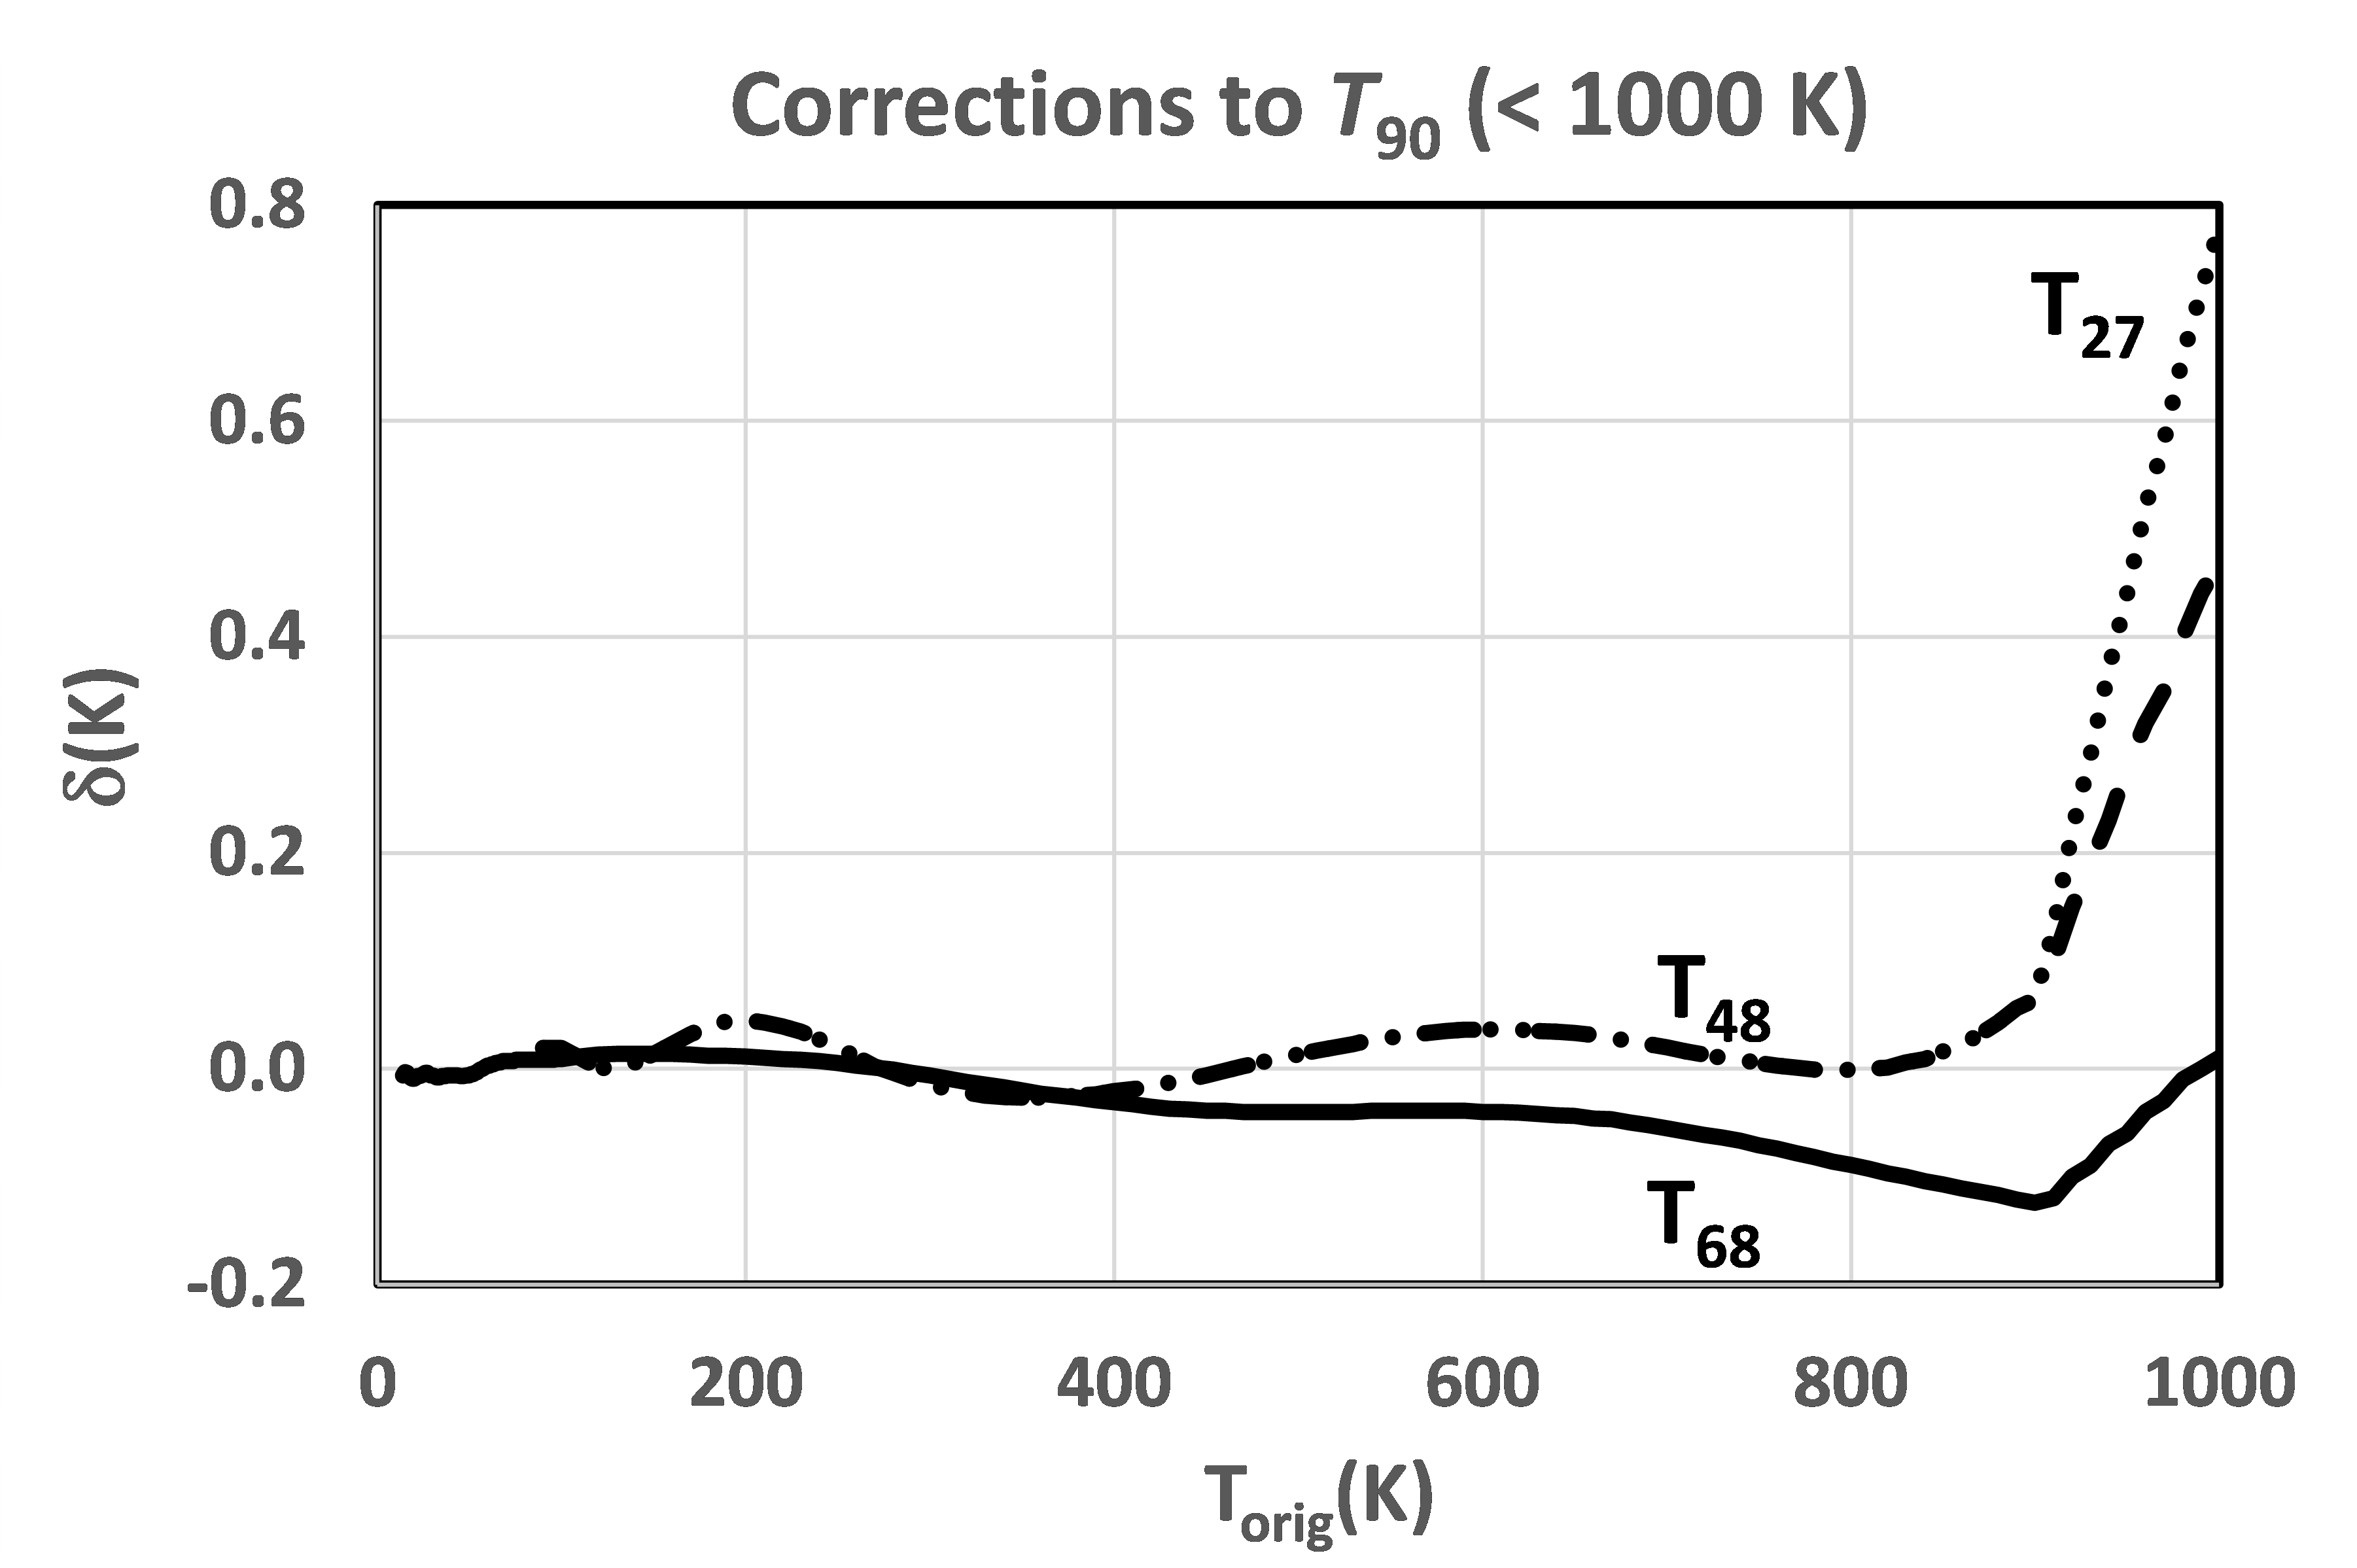 Corrections to T90 (< 1000 K)